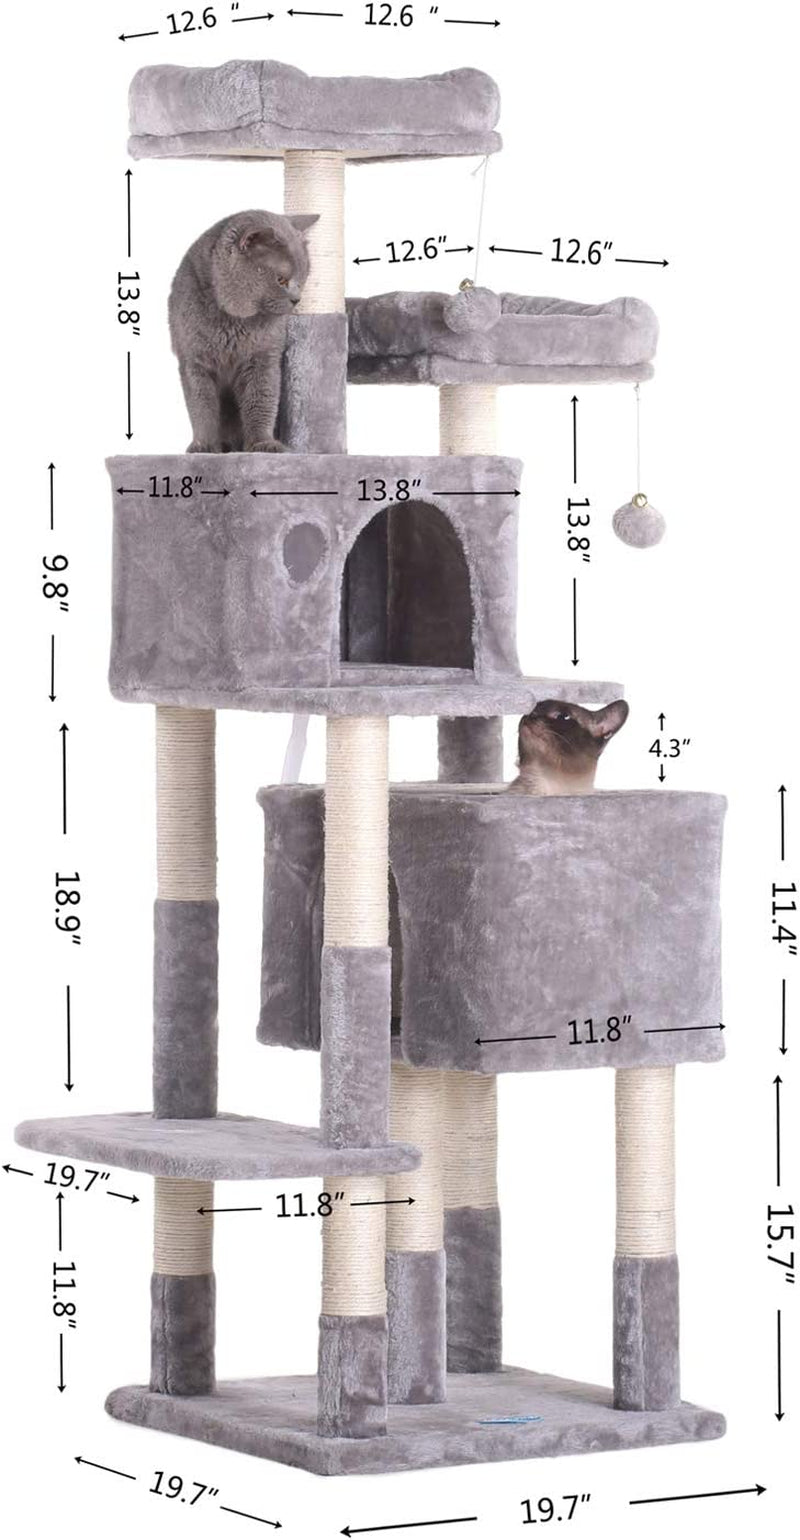 Hey-Bro 60 Inches Large Multi-Level Cat Tree Condo Furniture with Sisal-Covered Scratching Posts, 2 Plush Condos, 2 Plush Perches, for Kittens, Cats and Pets, Light Gray MPJ012W